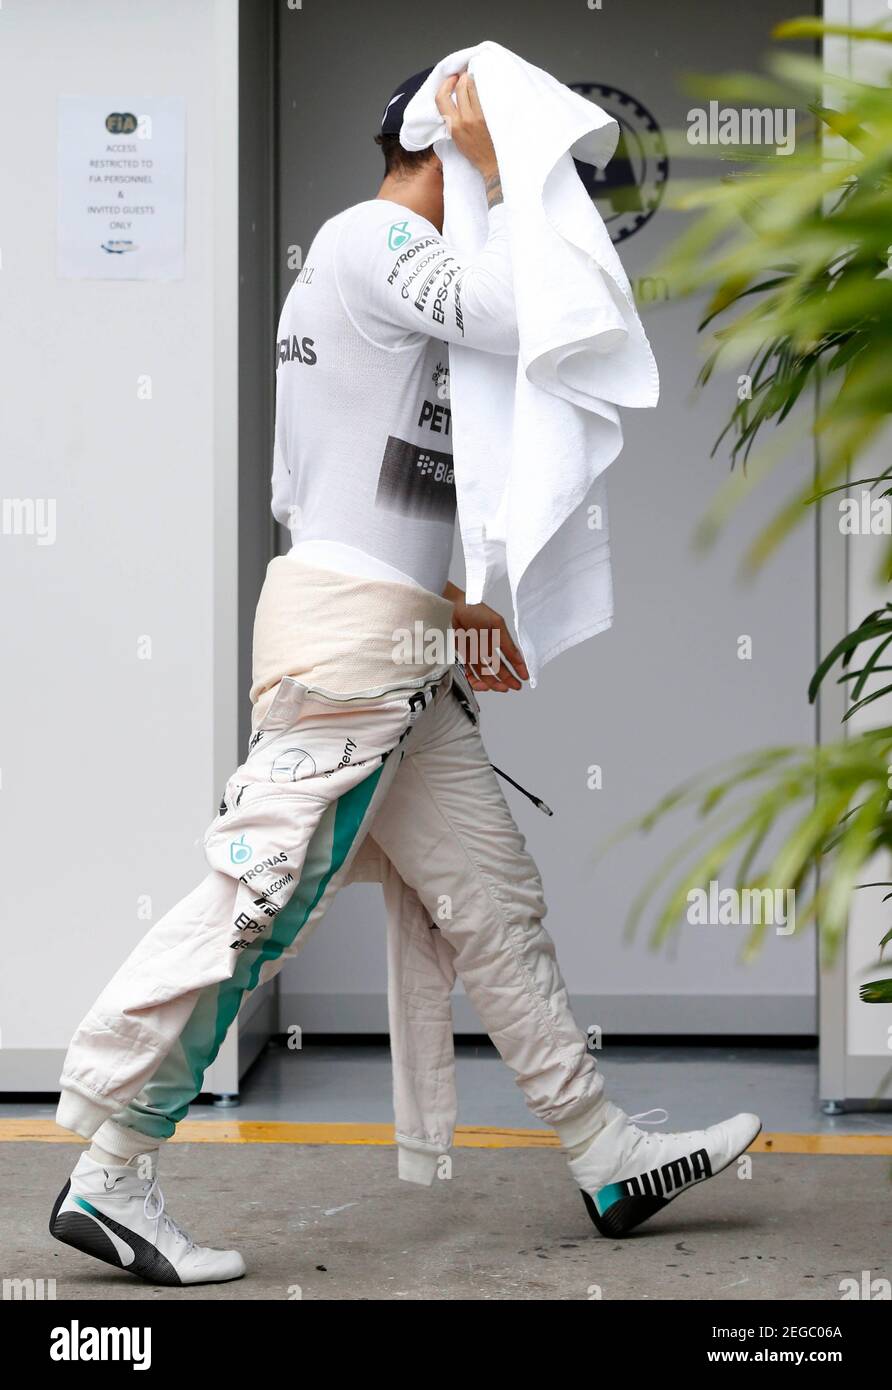 Formula One - F1 - Malaysian Grand Prix 2015 - Sepang International Circuit, Kuala Lumpur, Malaysia - 28/3/15  Mercedes' Lewis Hamilton covers his head with a towel after qualifying was halted due to rain  Reuters / Olivia Harris  Livepic Stock Photo